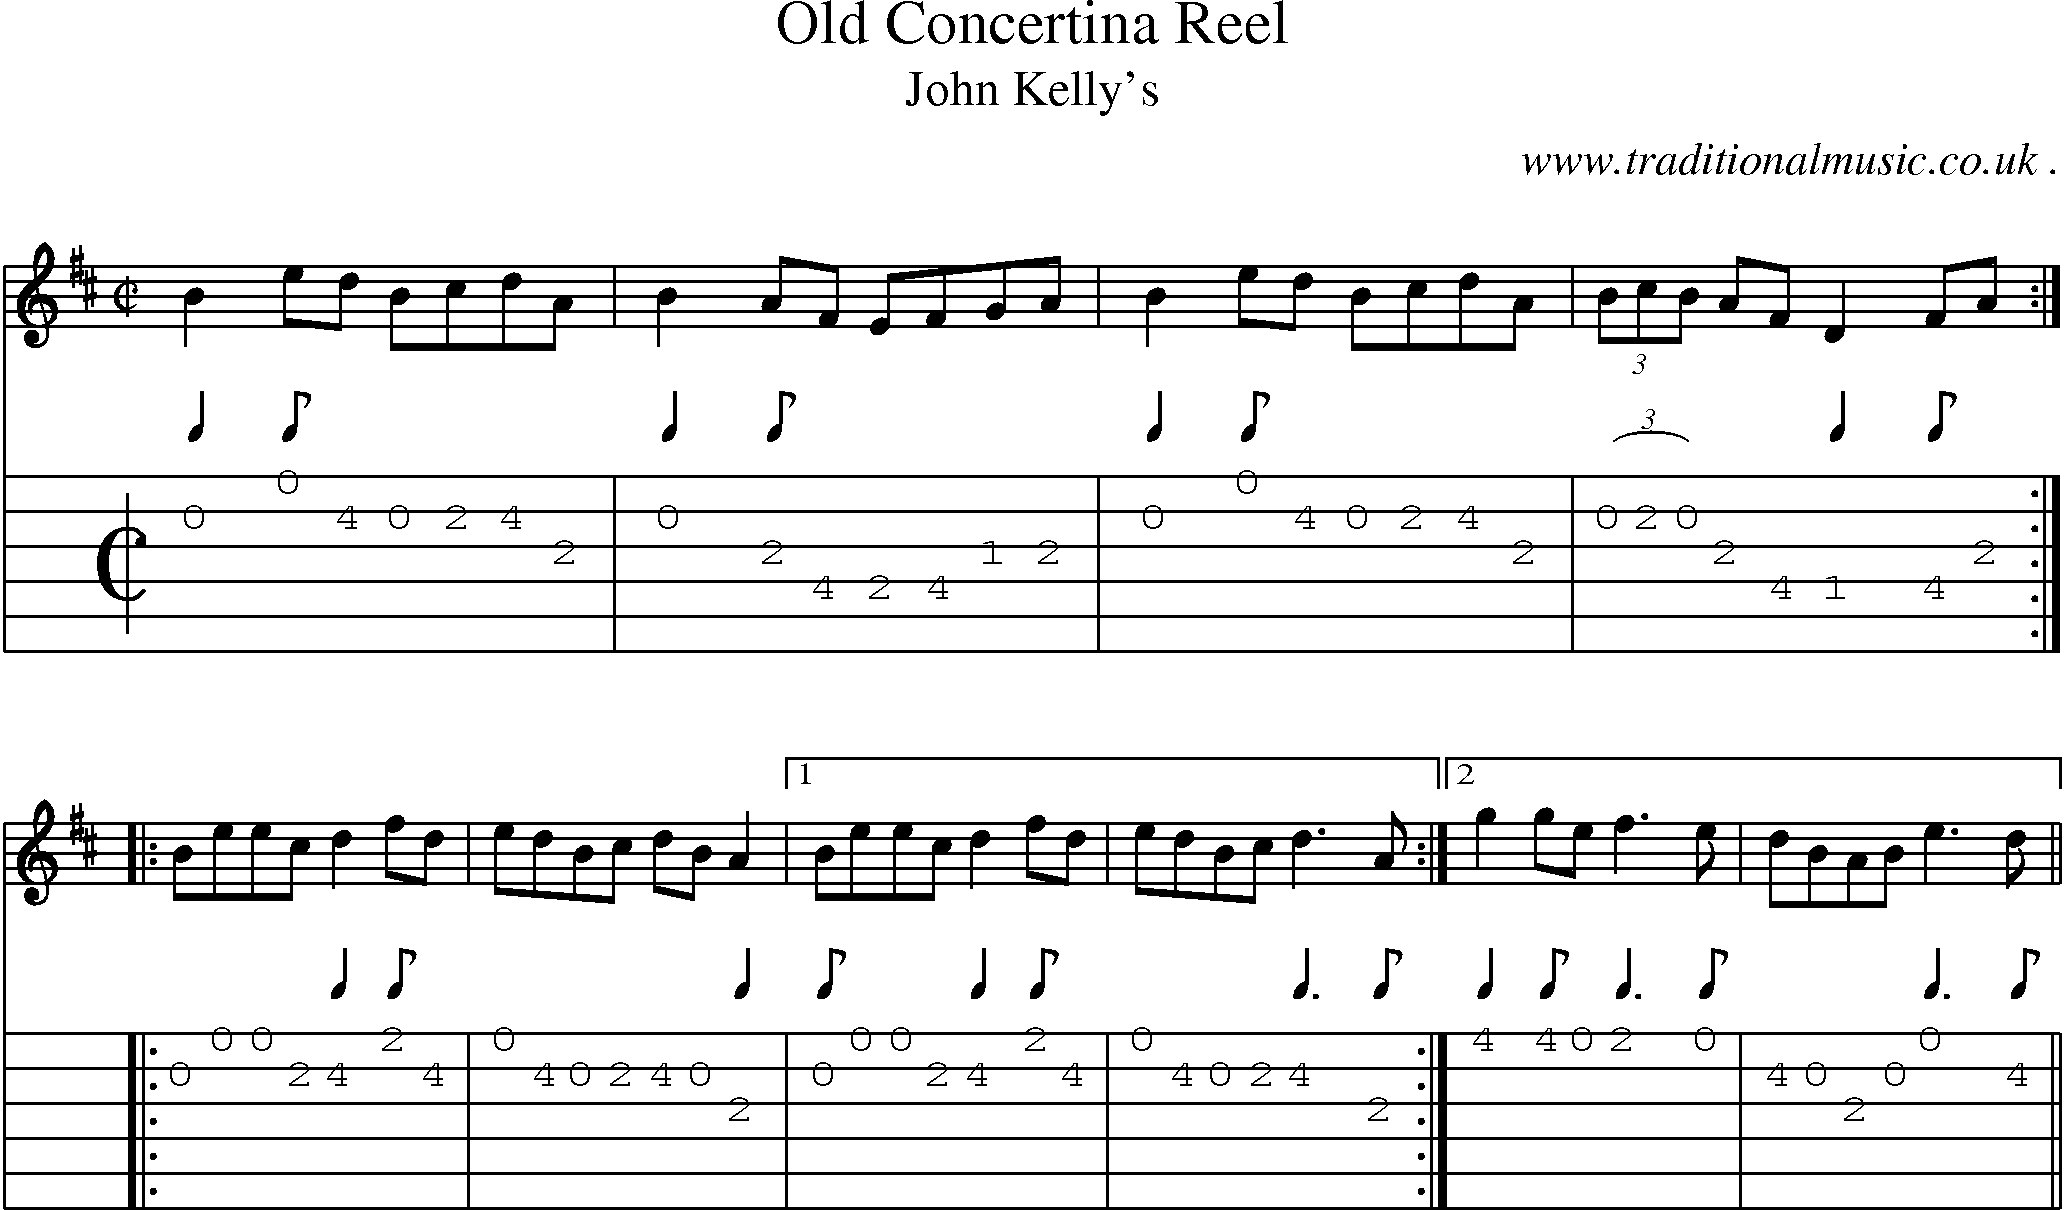 Sheet-Music and Guitar Tabs for Old Concertina Reel